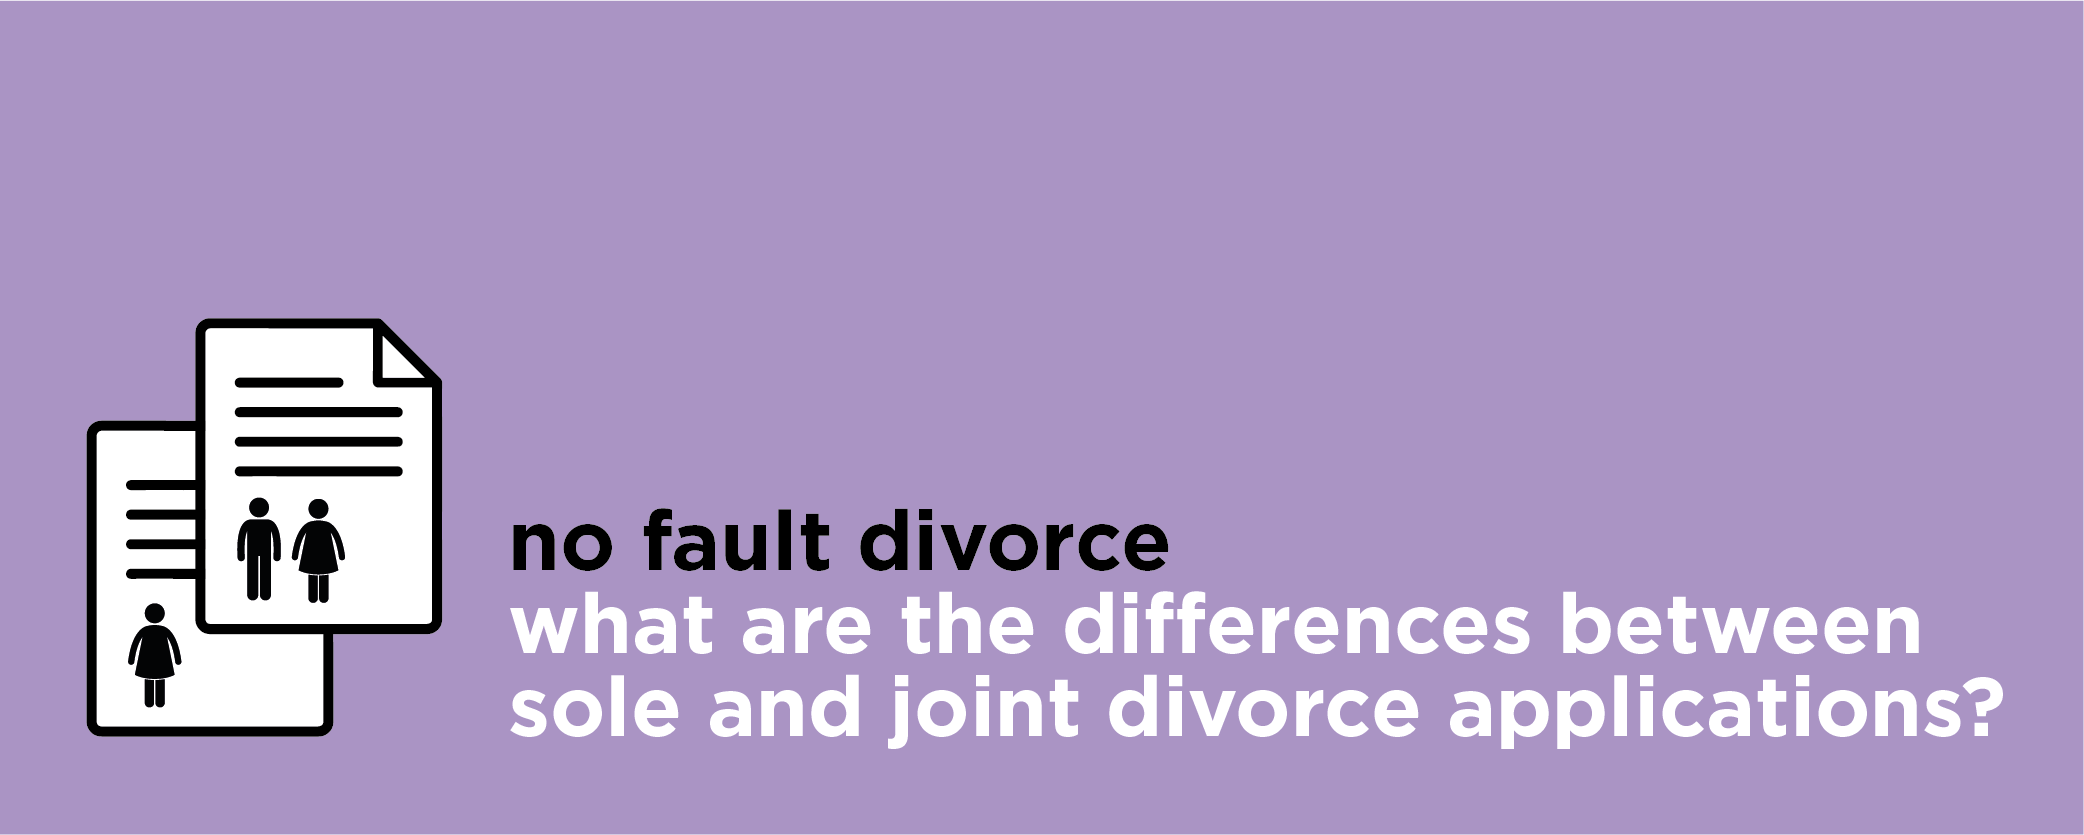 No Fault Divorce - Whats the difference between sole and joint divorce applications?